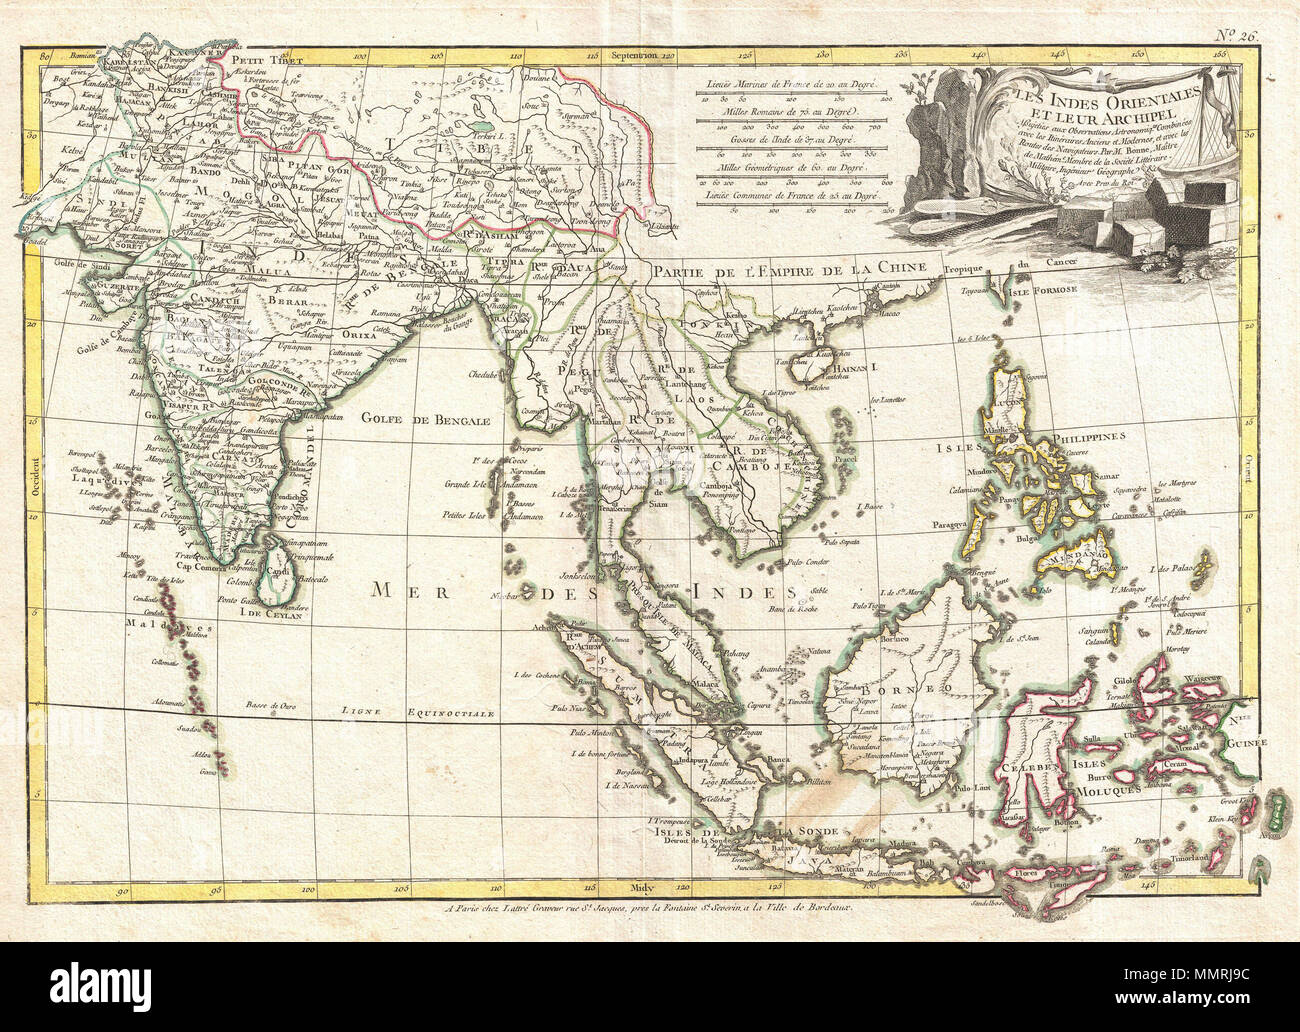 .  English: A beautiful example of Rigobert Bonne's c. 1770 map of India, Southeast Asia and the East Indies. Covers from Kandahar and the Maldives in the west eastward to include all of India, Southeast Asia (modern Burma, Thailand or Siam, Malaysia, Cambodia, Vietnam, Laos), the East Indies (Java, Sumatra, Borneo and the Celebes) and the Philippines. Also includes much of Tibet. Identifies countless cities, rivers, waterways, and states throughout the region. Names the Straight Singapore as Sin Capura. Vietnam is divided into the kingdoms fo Tonkin and Chochinchine. Includes the Tip of Formo Stock Photo